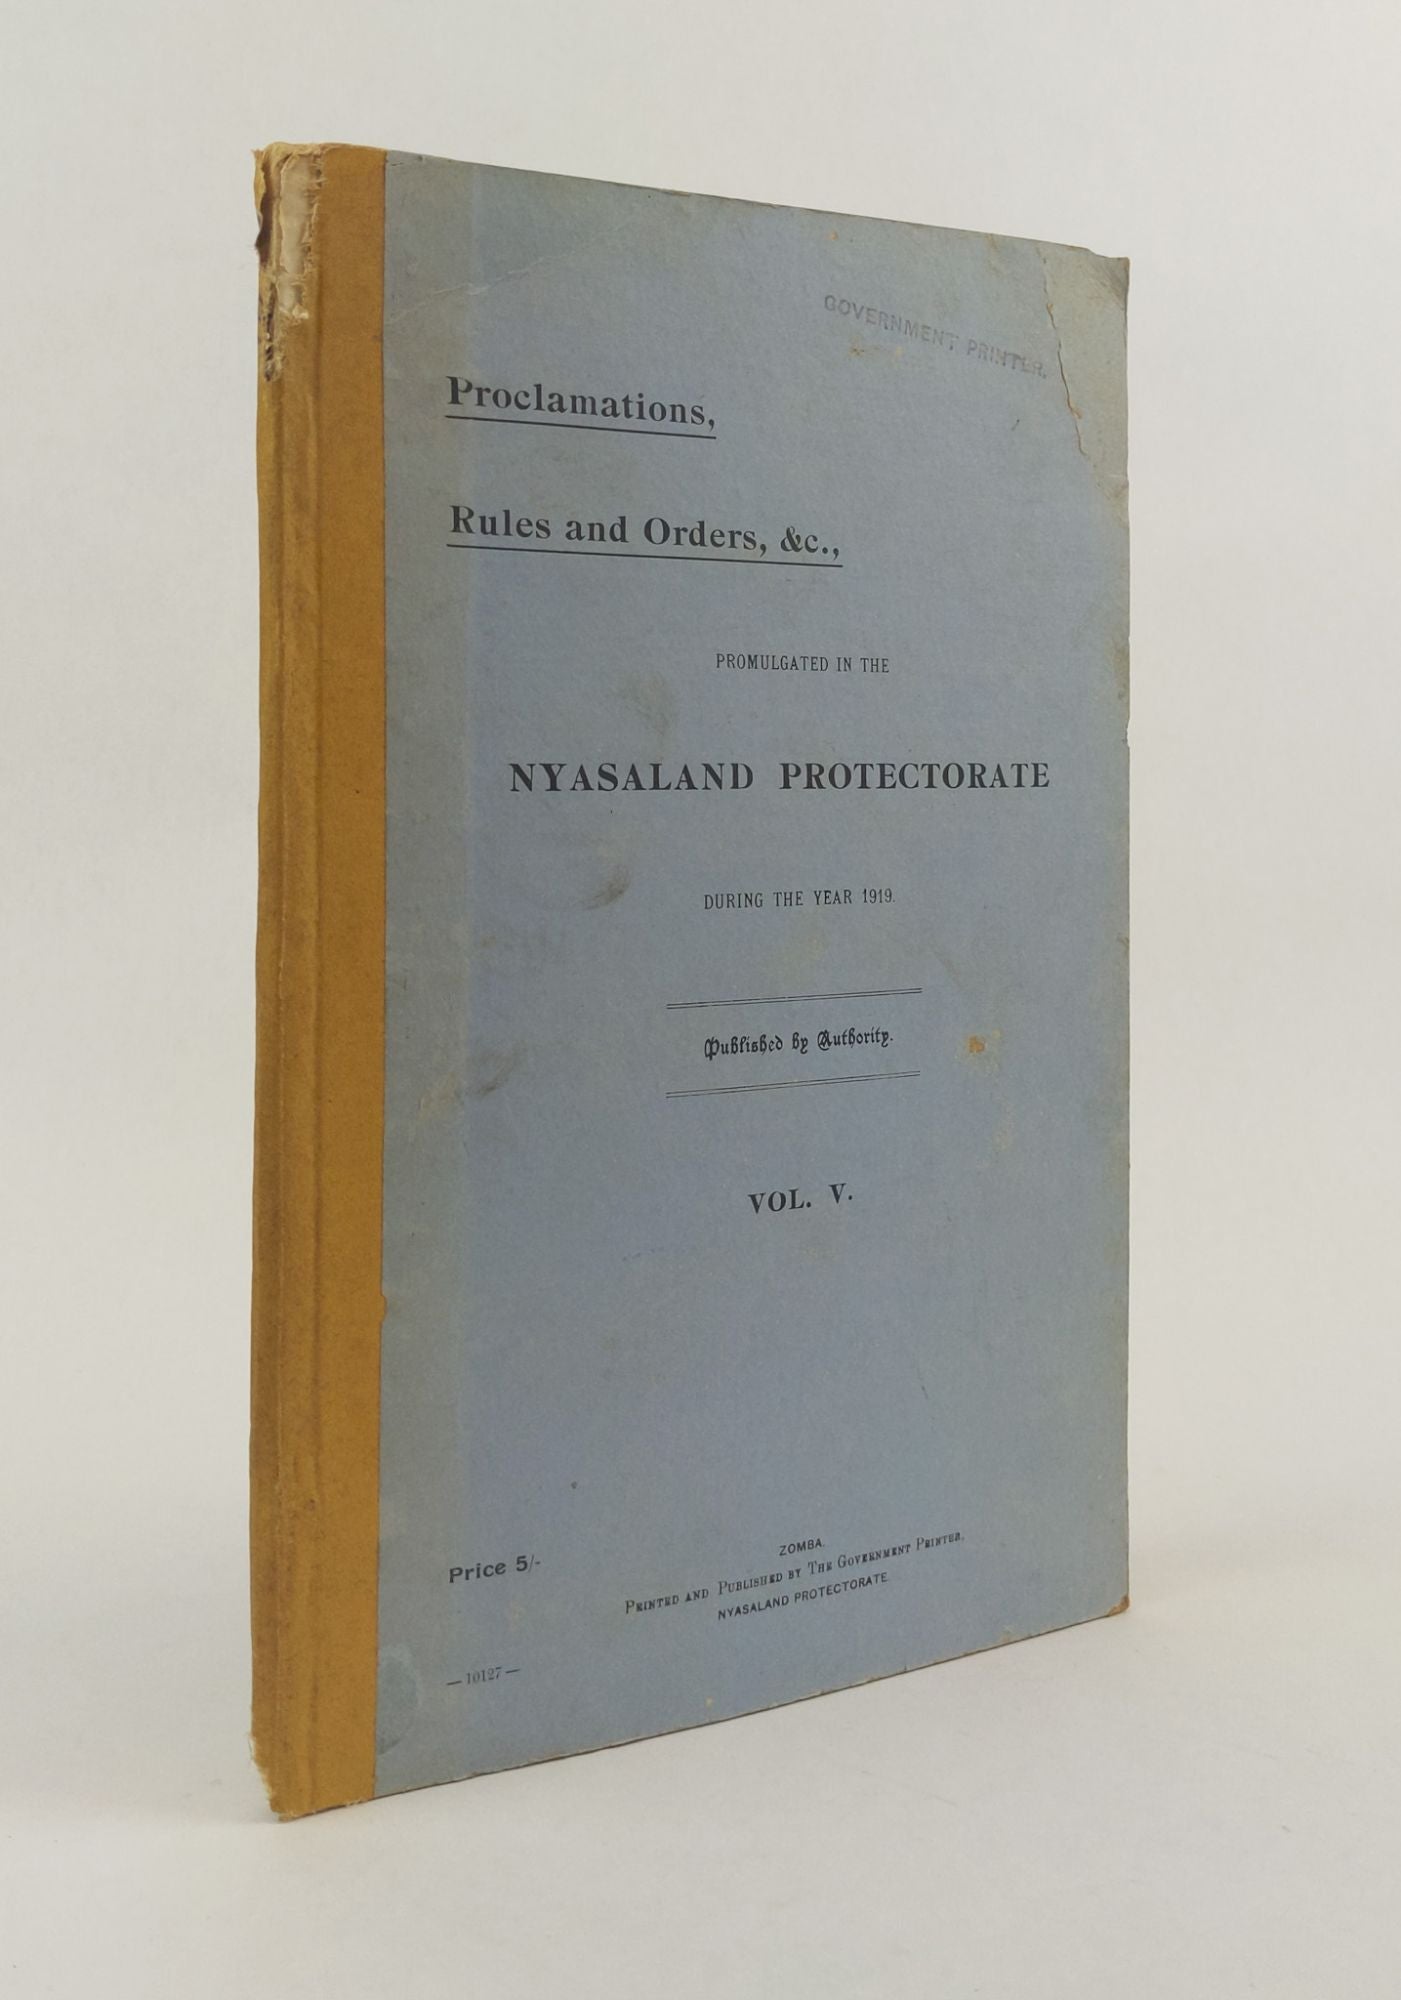 1371427 PROCLAMATIONS, RULES AND ORDERS, &C., PROMULGATED IN THE NYASALAND PROTECTORATE DURING THE YEAR 1919. VOL. V